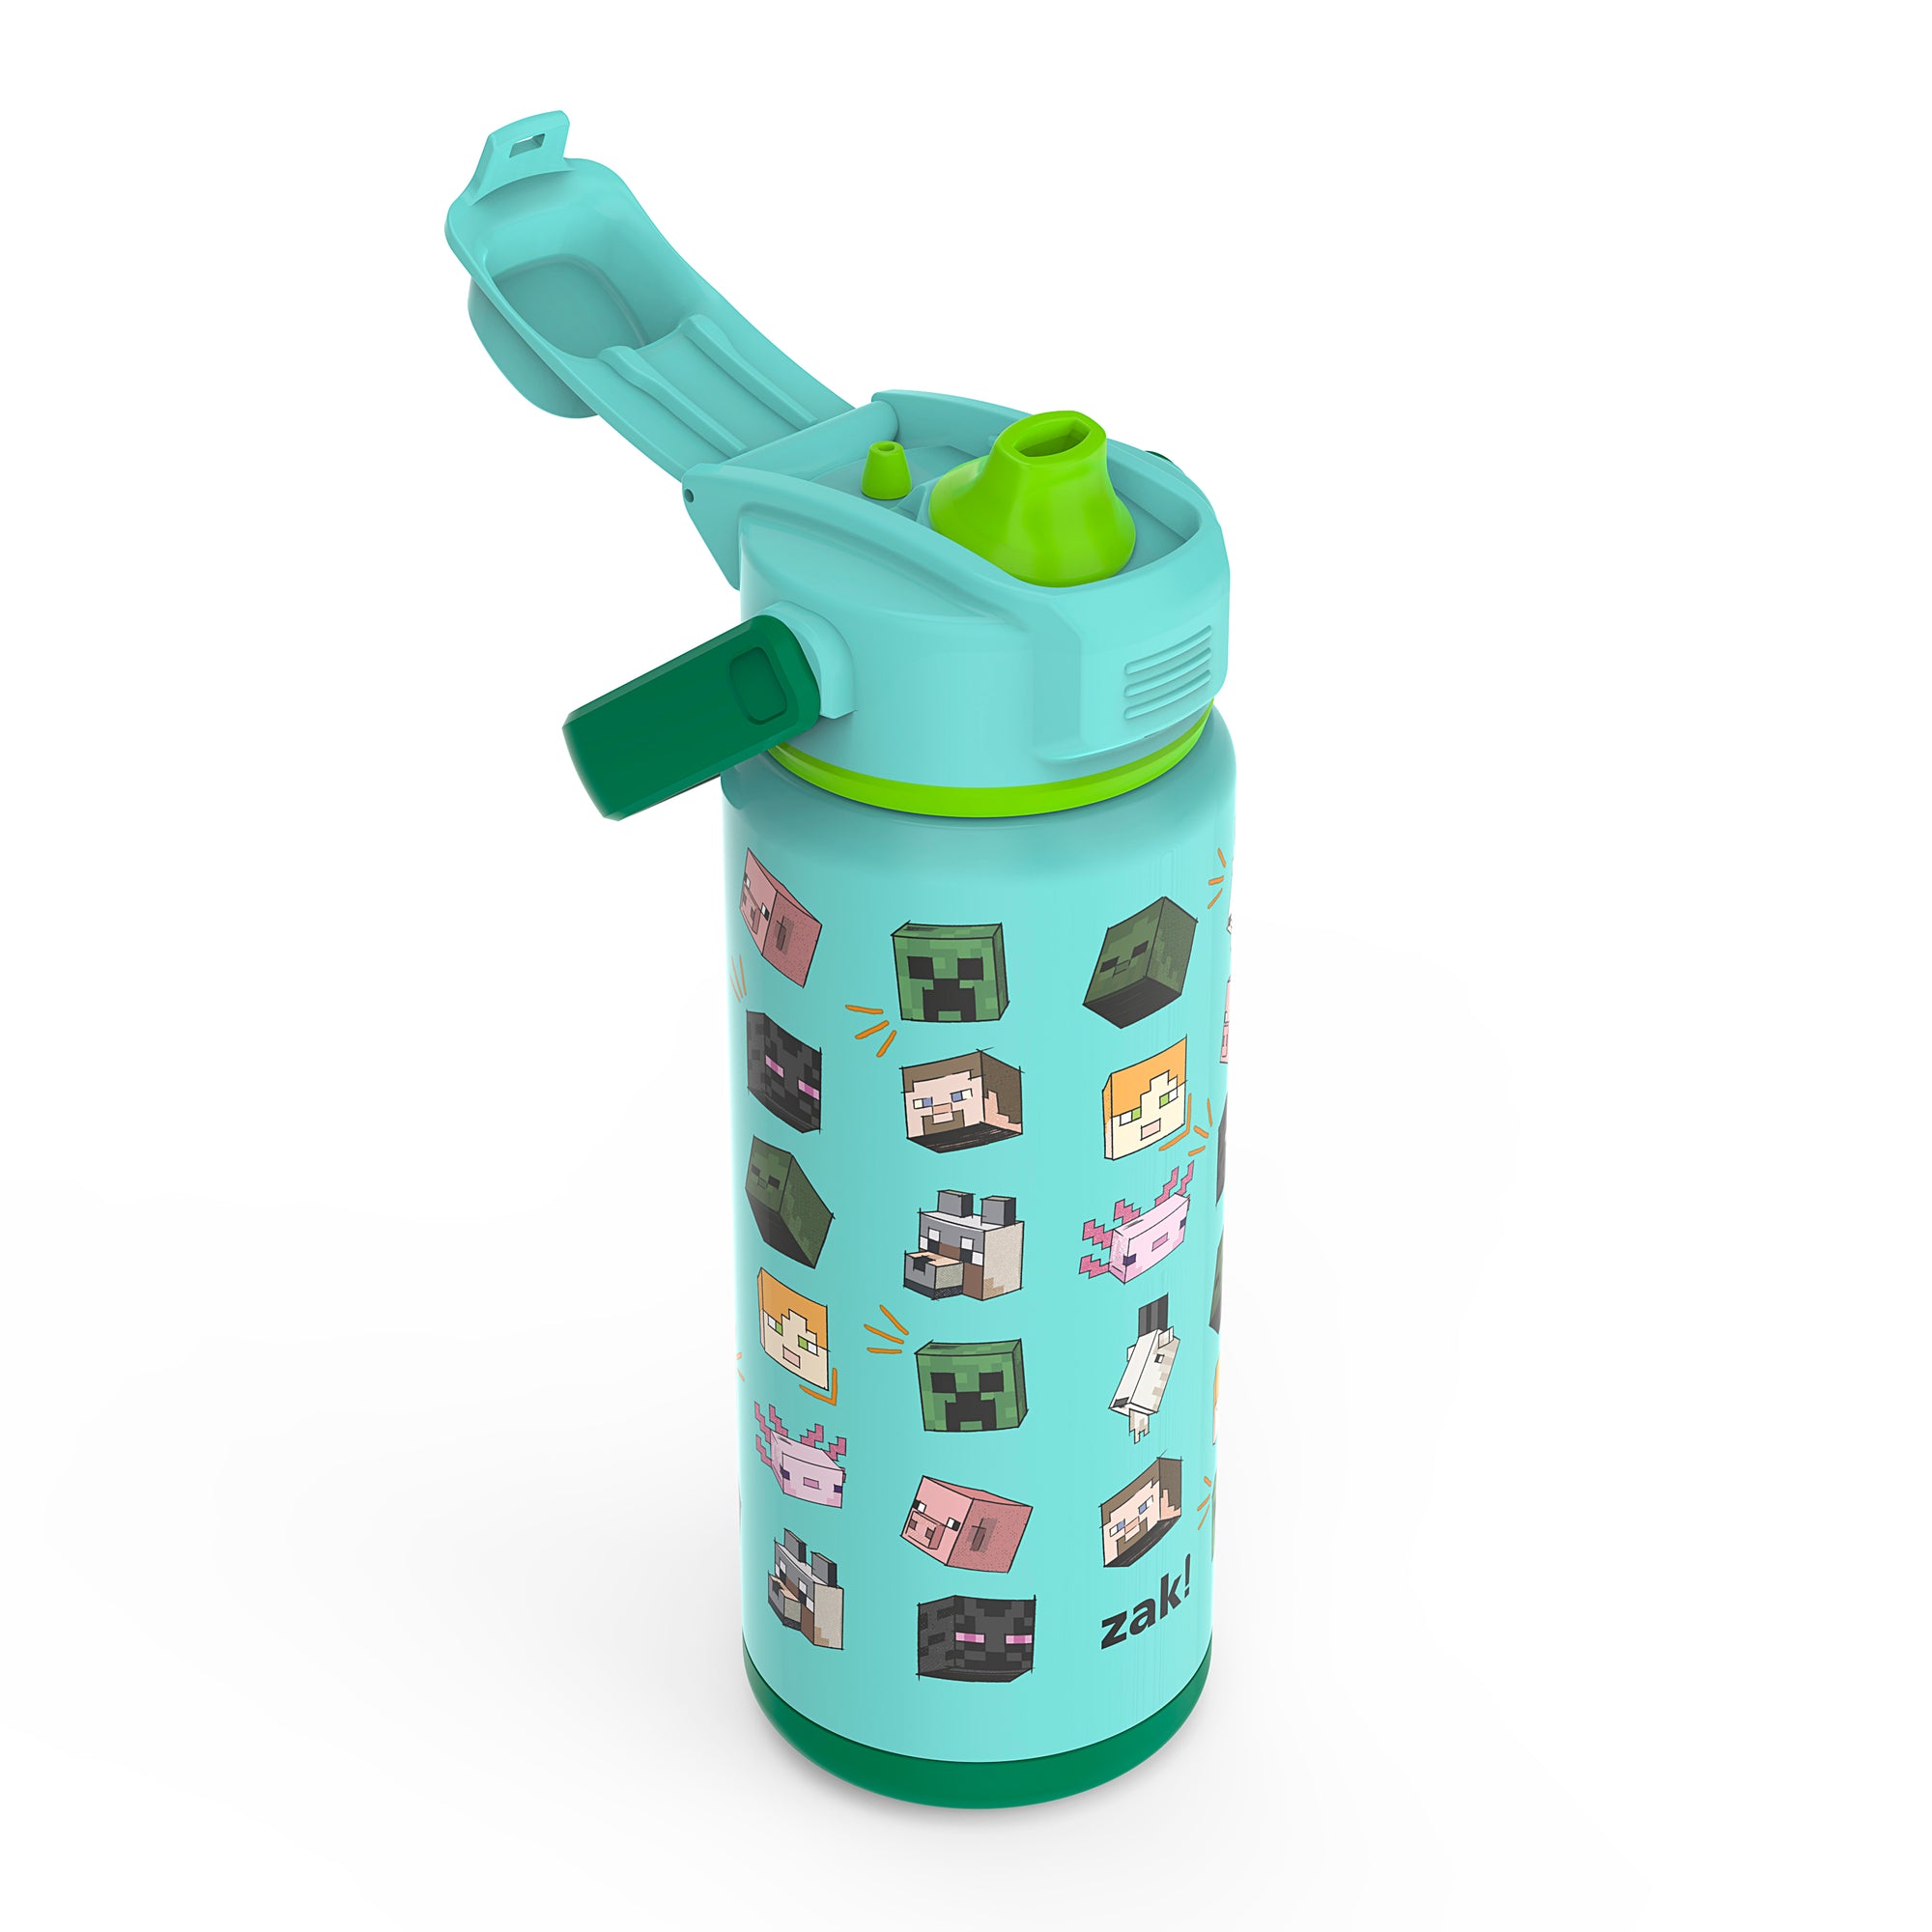 Minecraft Creeper Beacon Stainless Steel Insulated Kids Water Bottle with Covered Spout, 20 Ounces